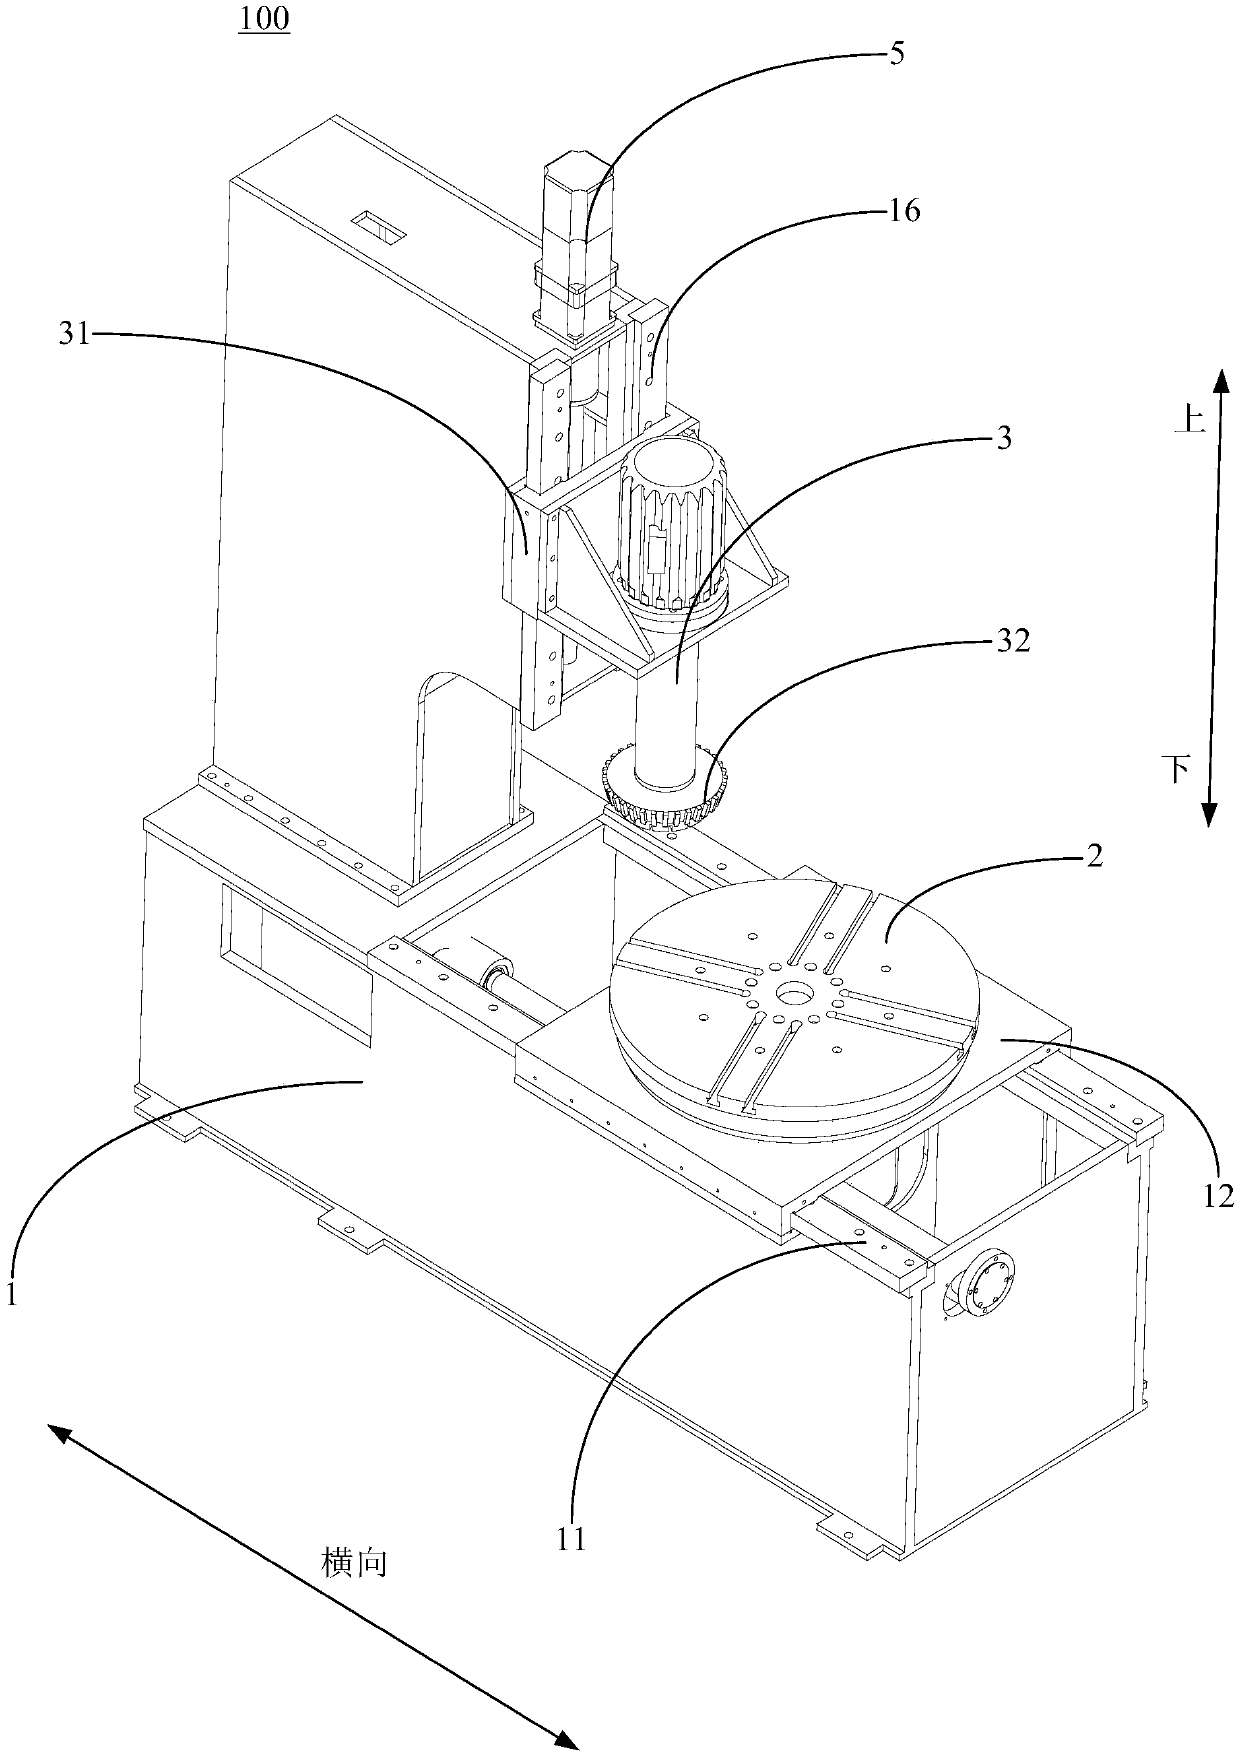 Forming machine tool for rice-milling grinding wheel